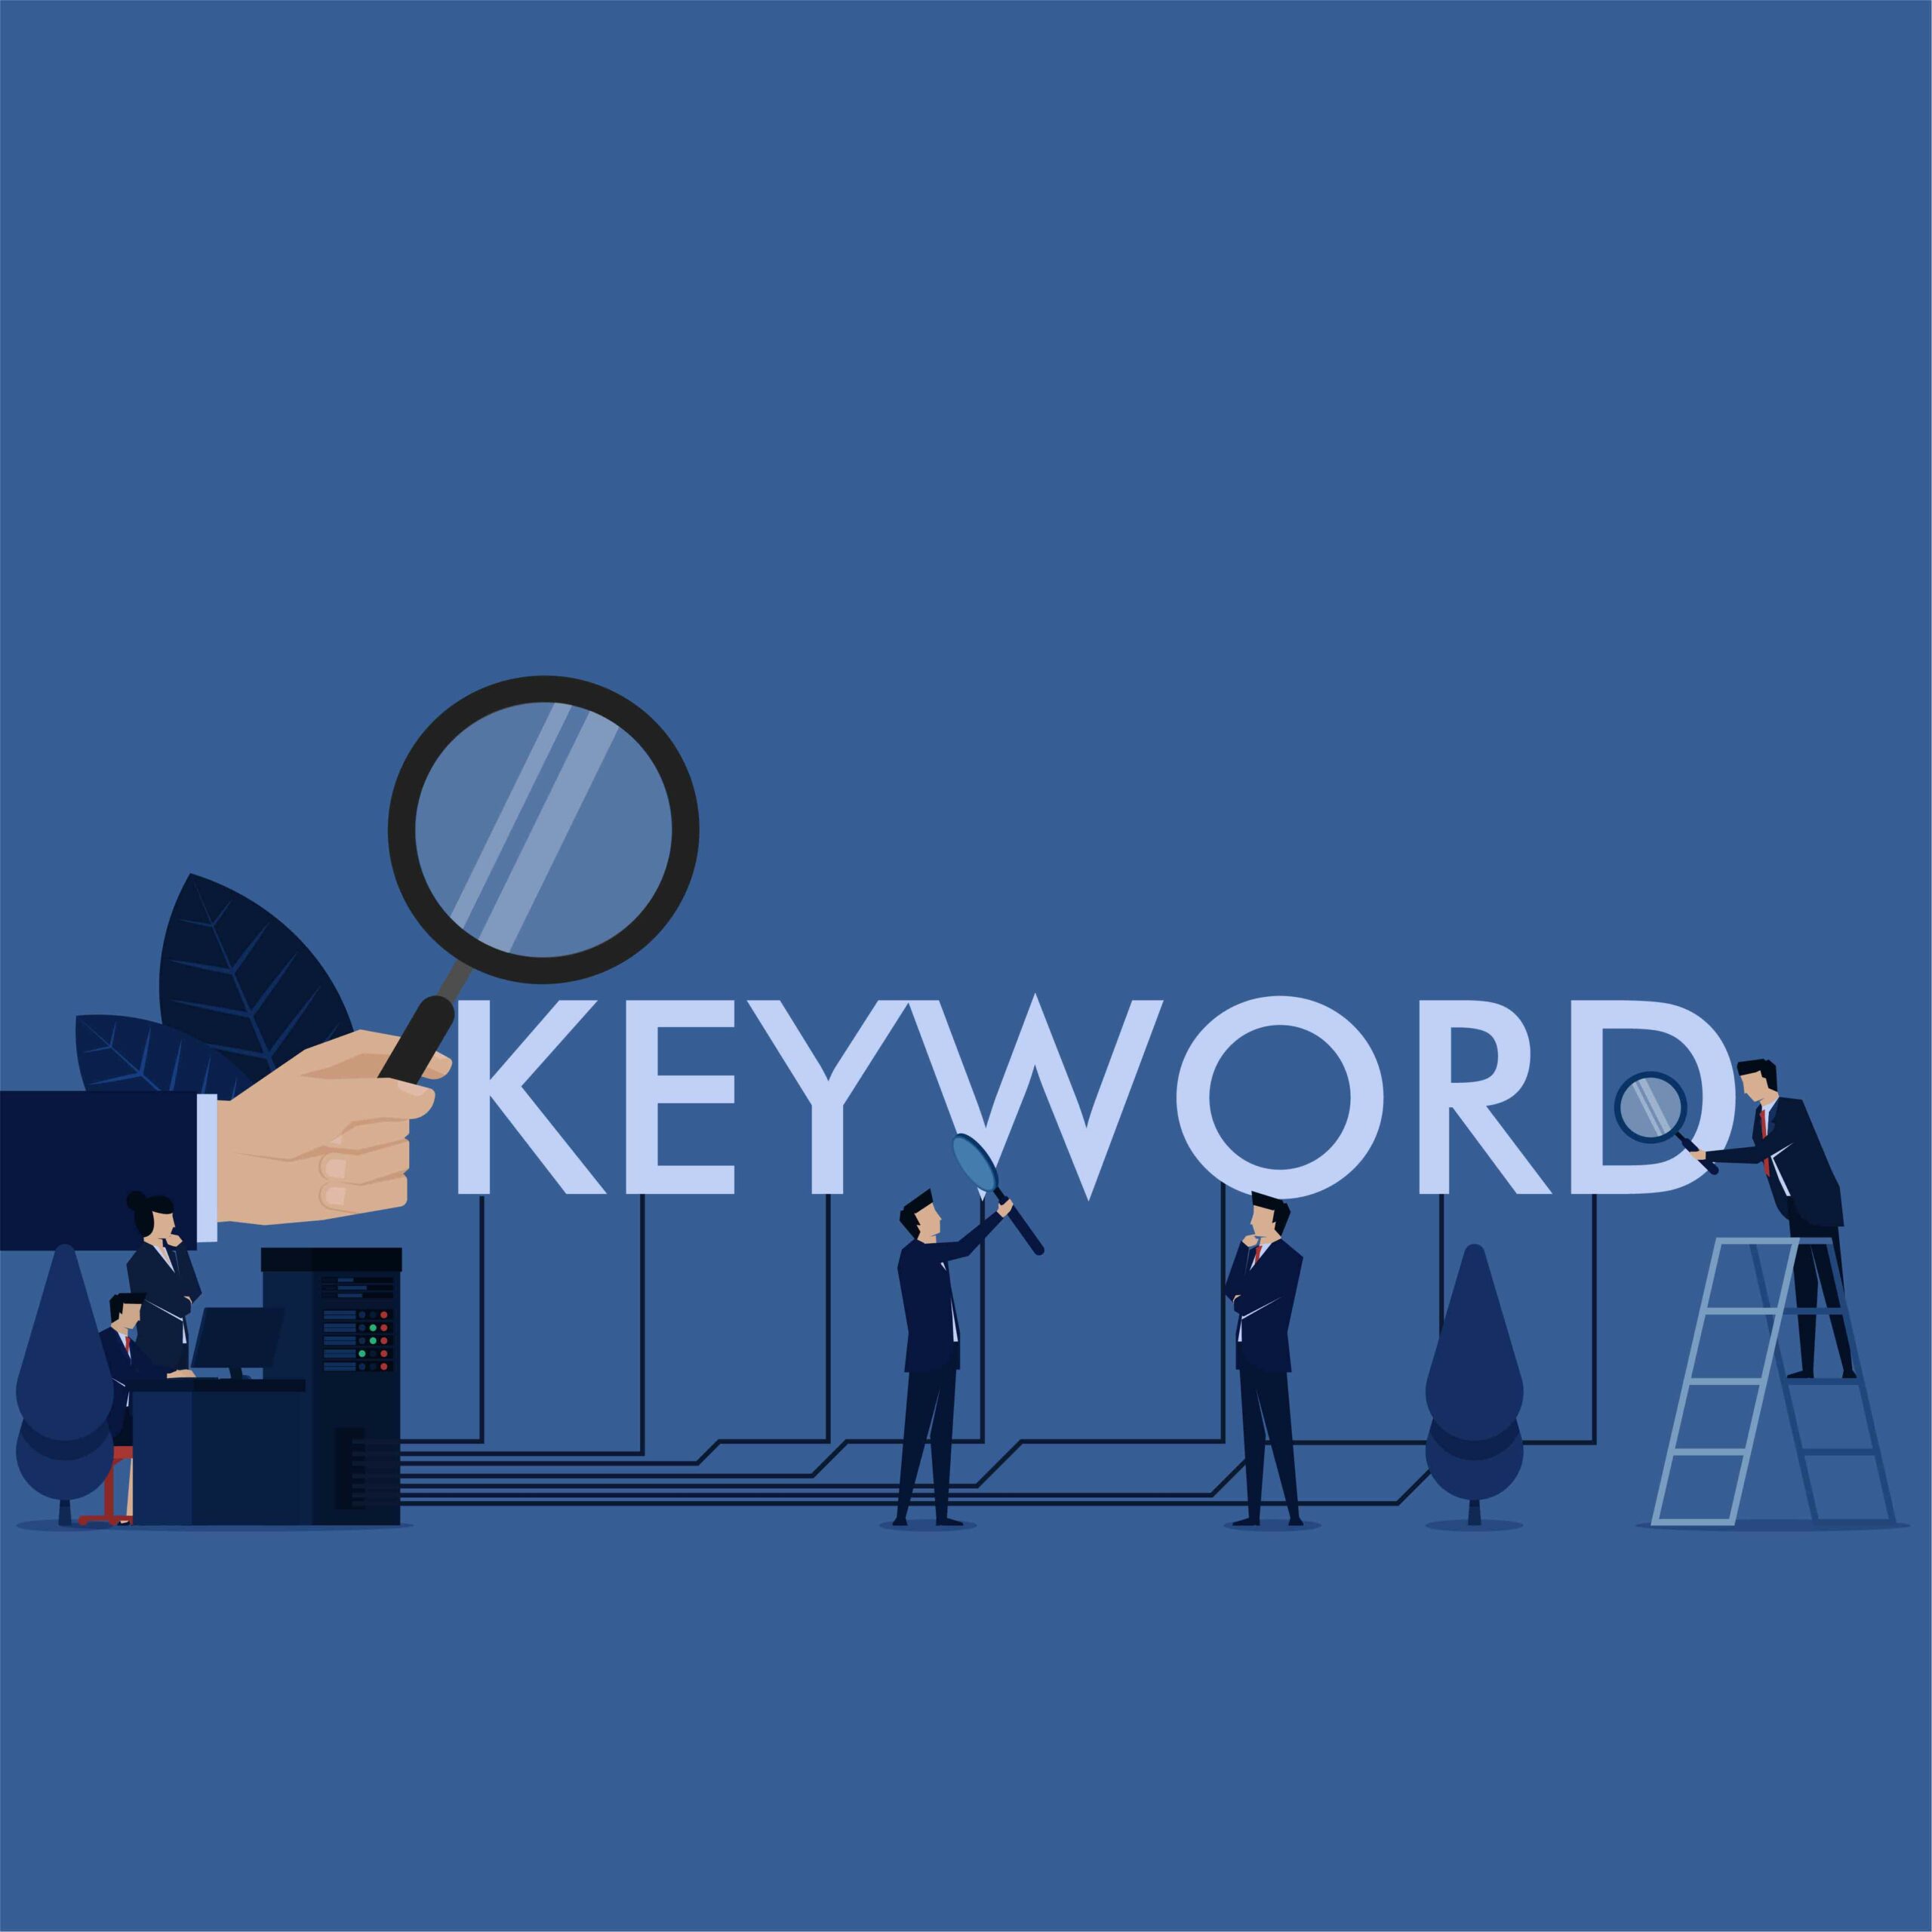 An illustration of business people holding oversized magnifying glasses. The word "keyword appears above them with a giant hand holding another magnifying glass.